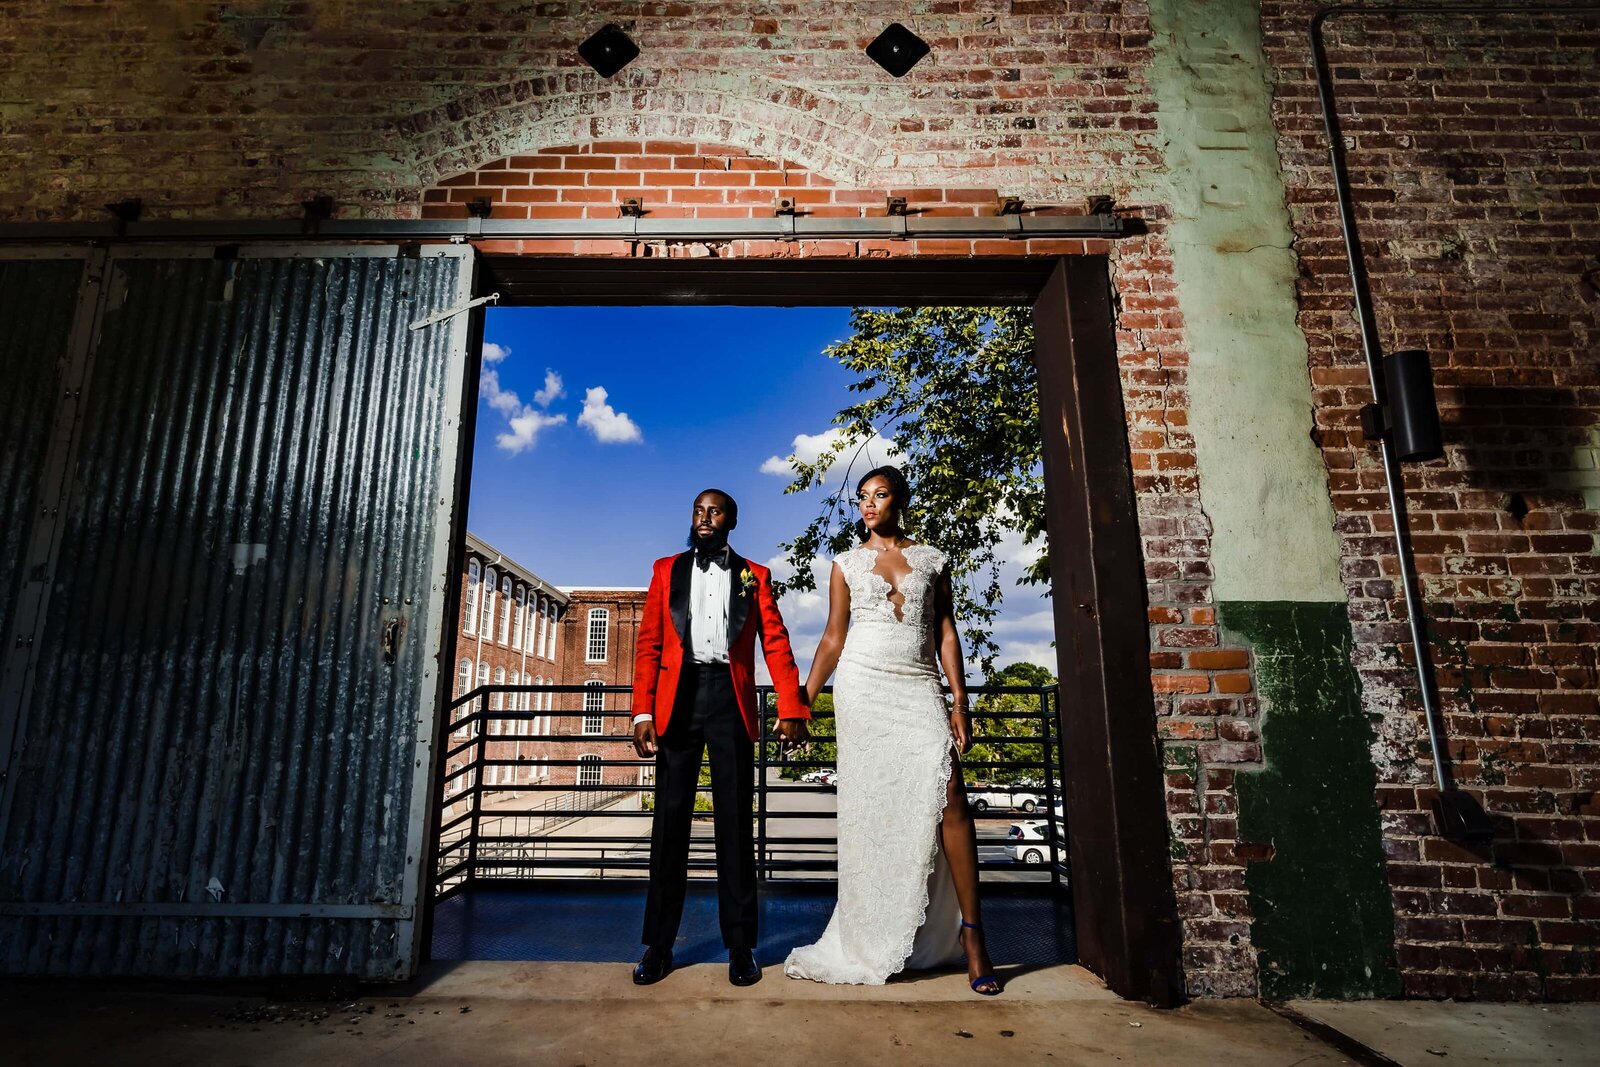 black couple in wedding attire poses for creative wedding photography